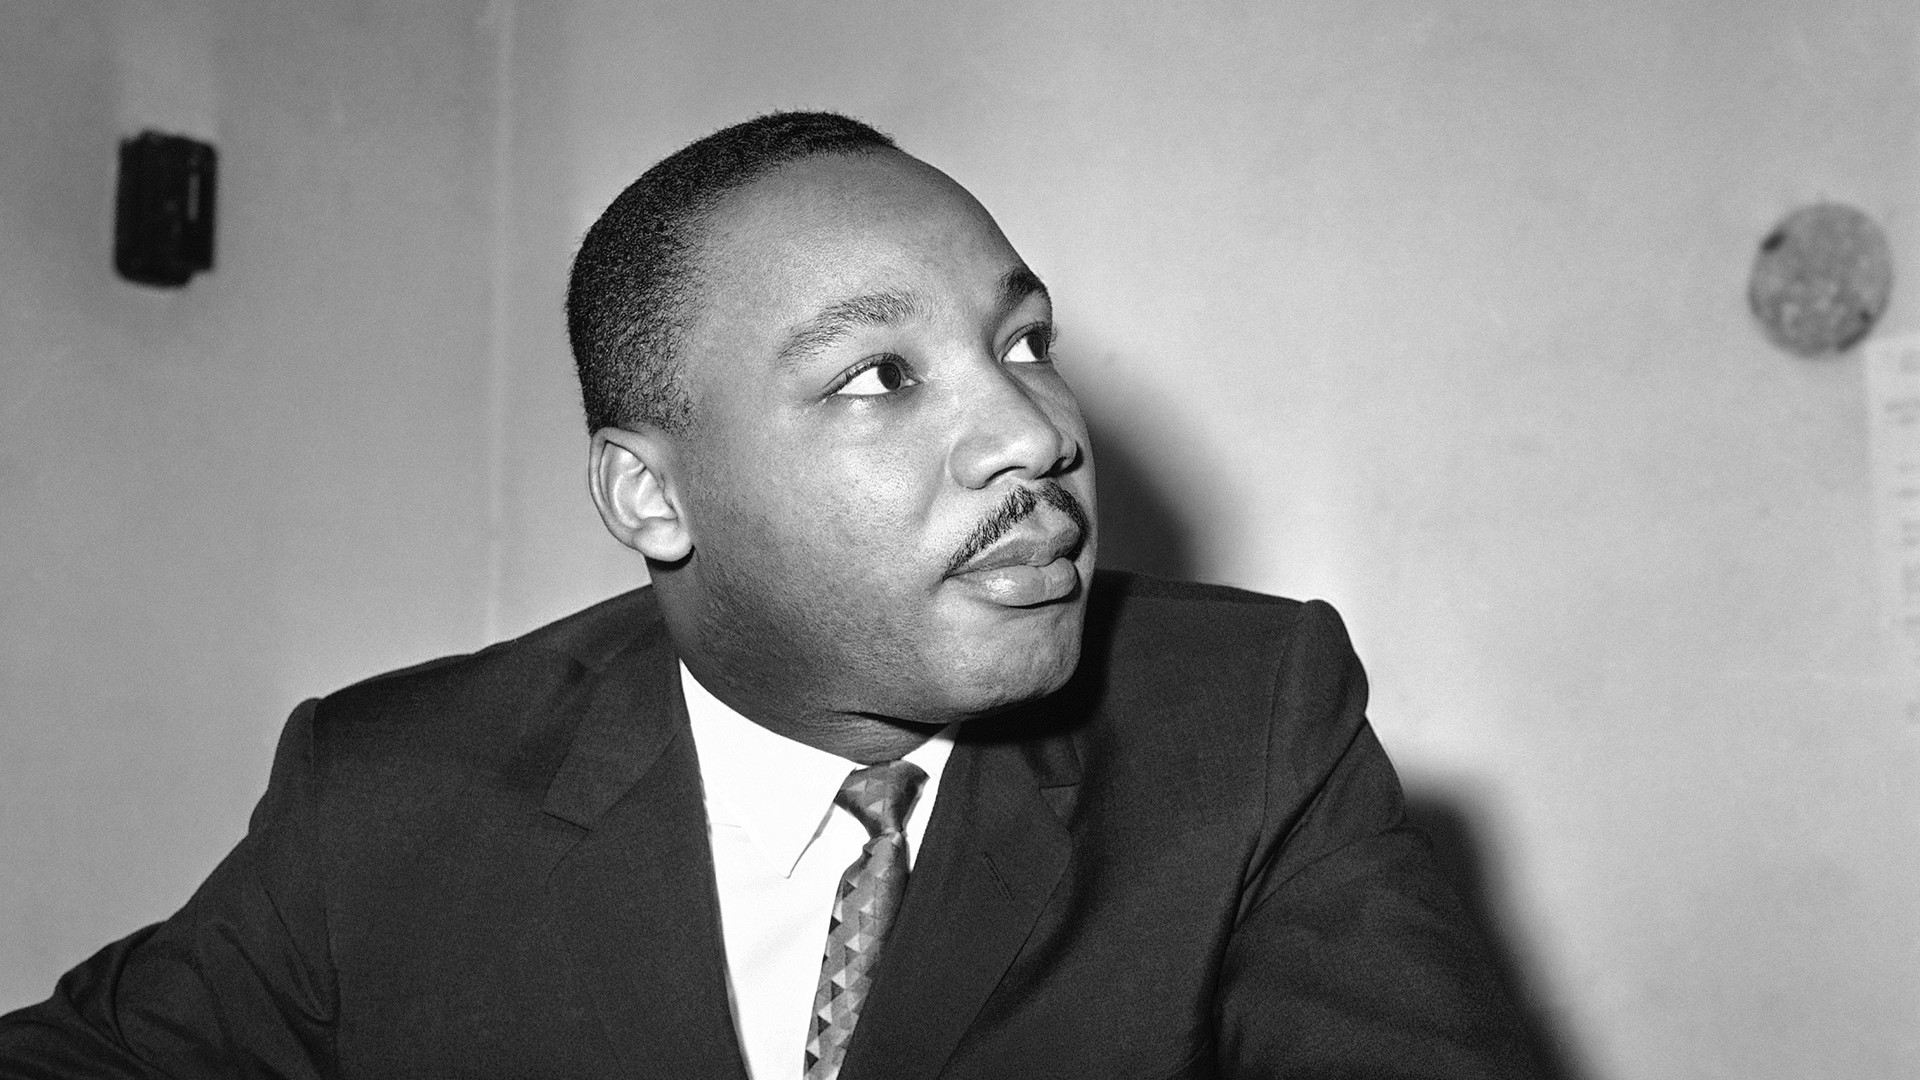 This week in history, we look back at the assassination of Martin Luther King Junior and the birth of Maya Angelou. Both happened on the same day, but different years.